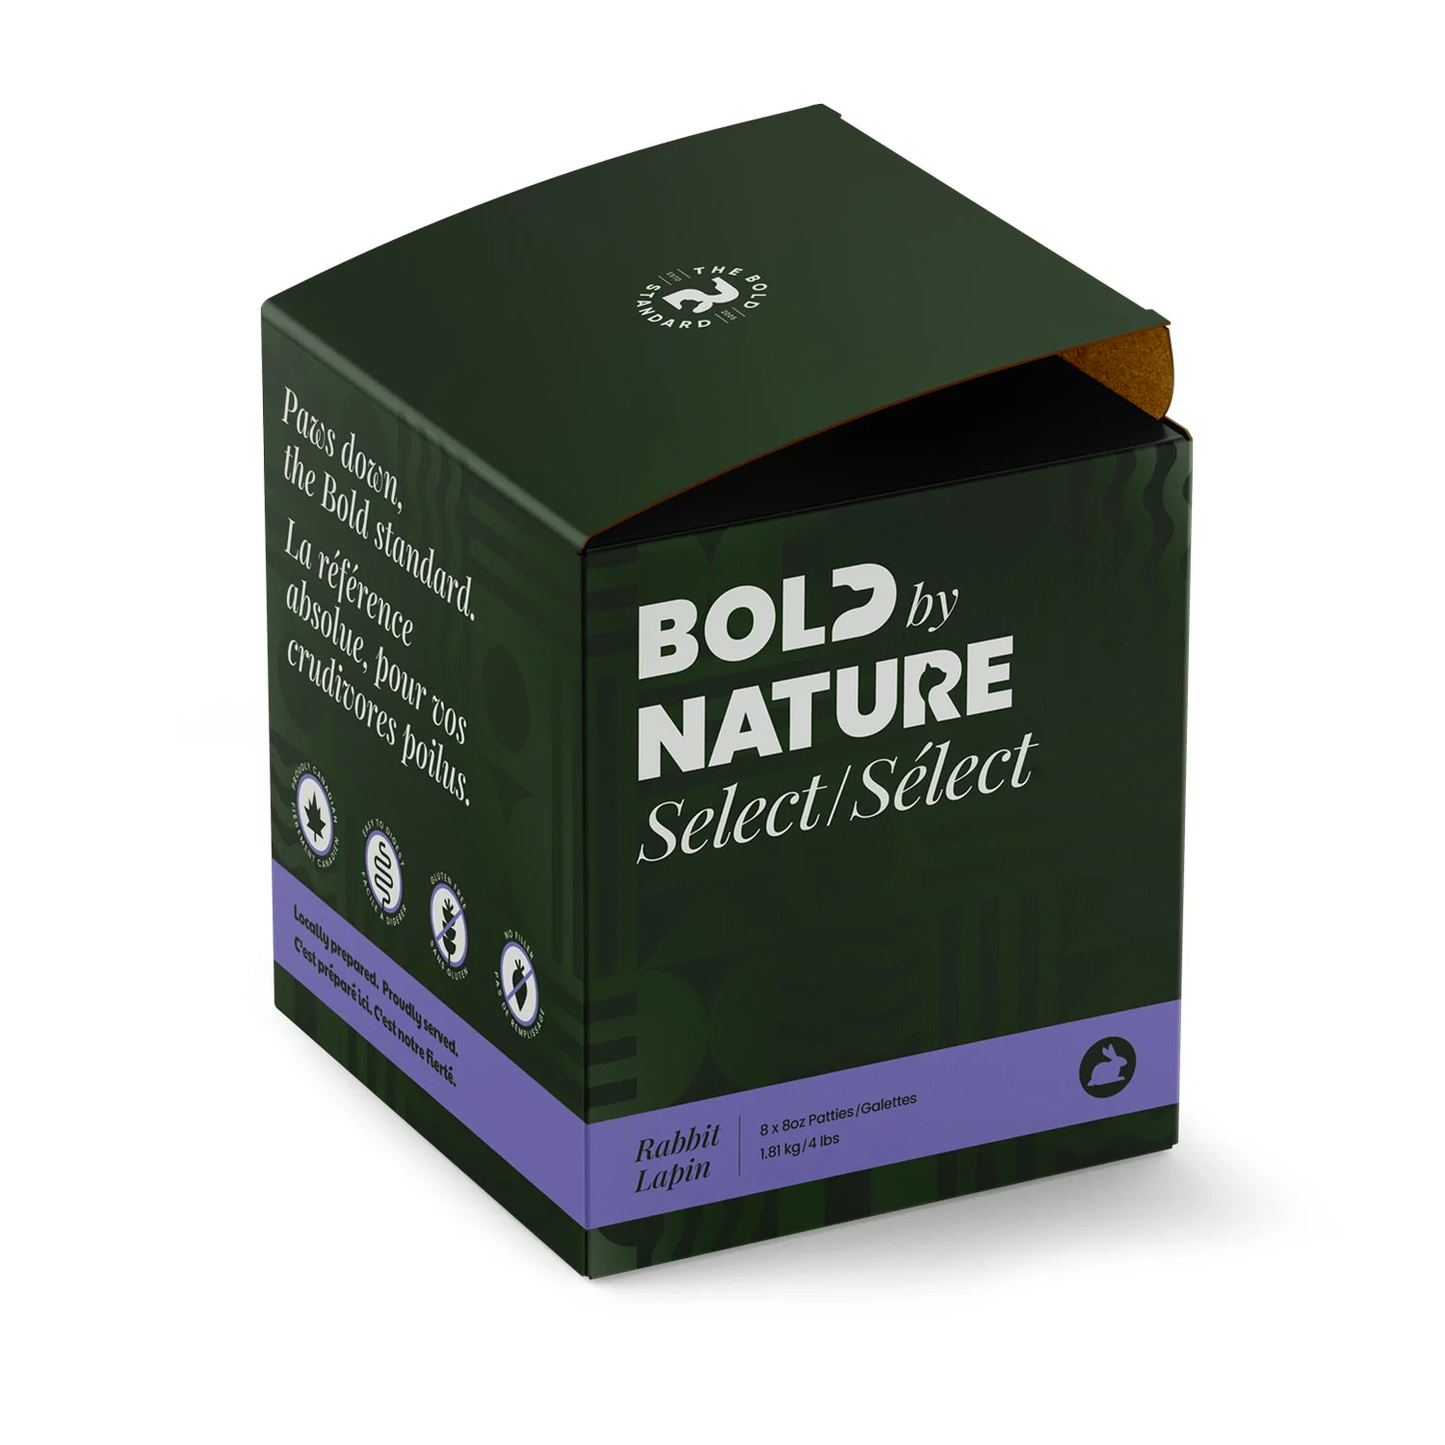 Bold by Nature - Select Dog - Raw Dog Food